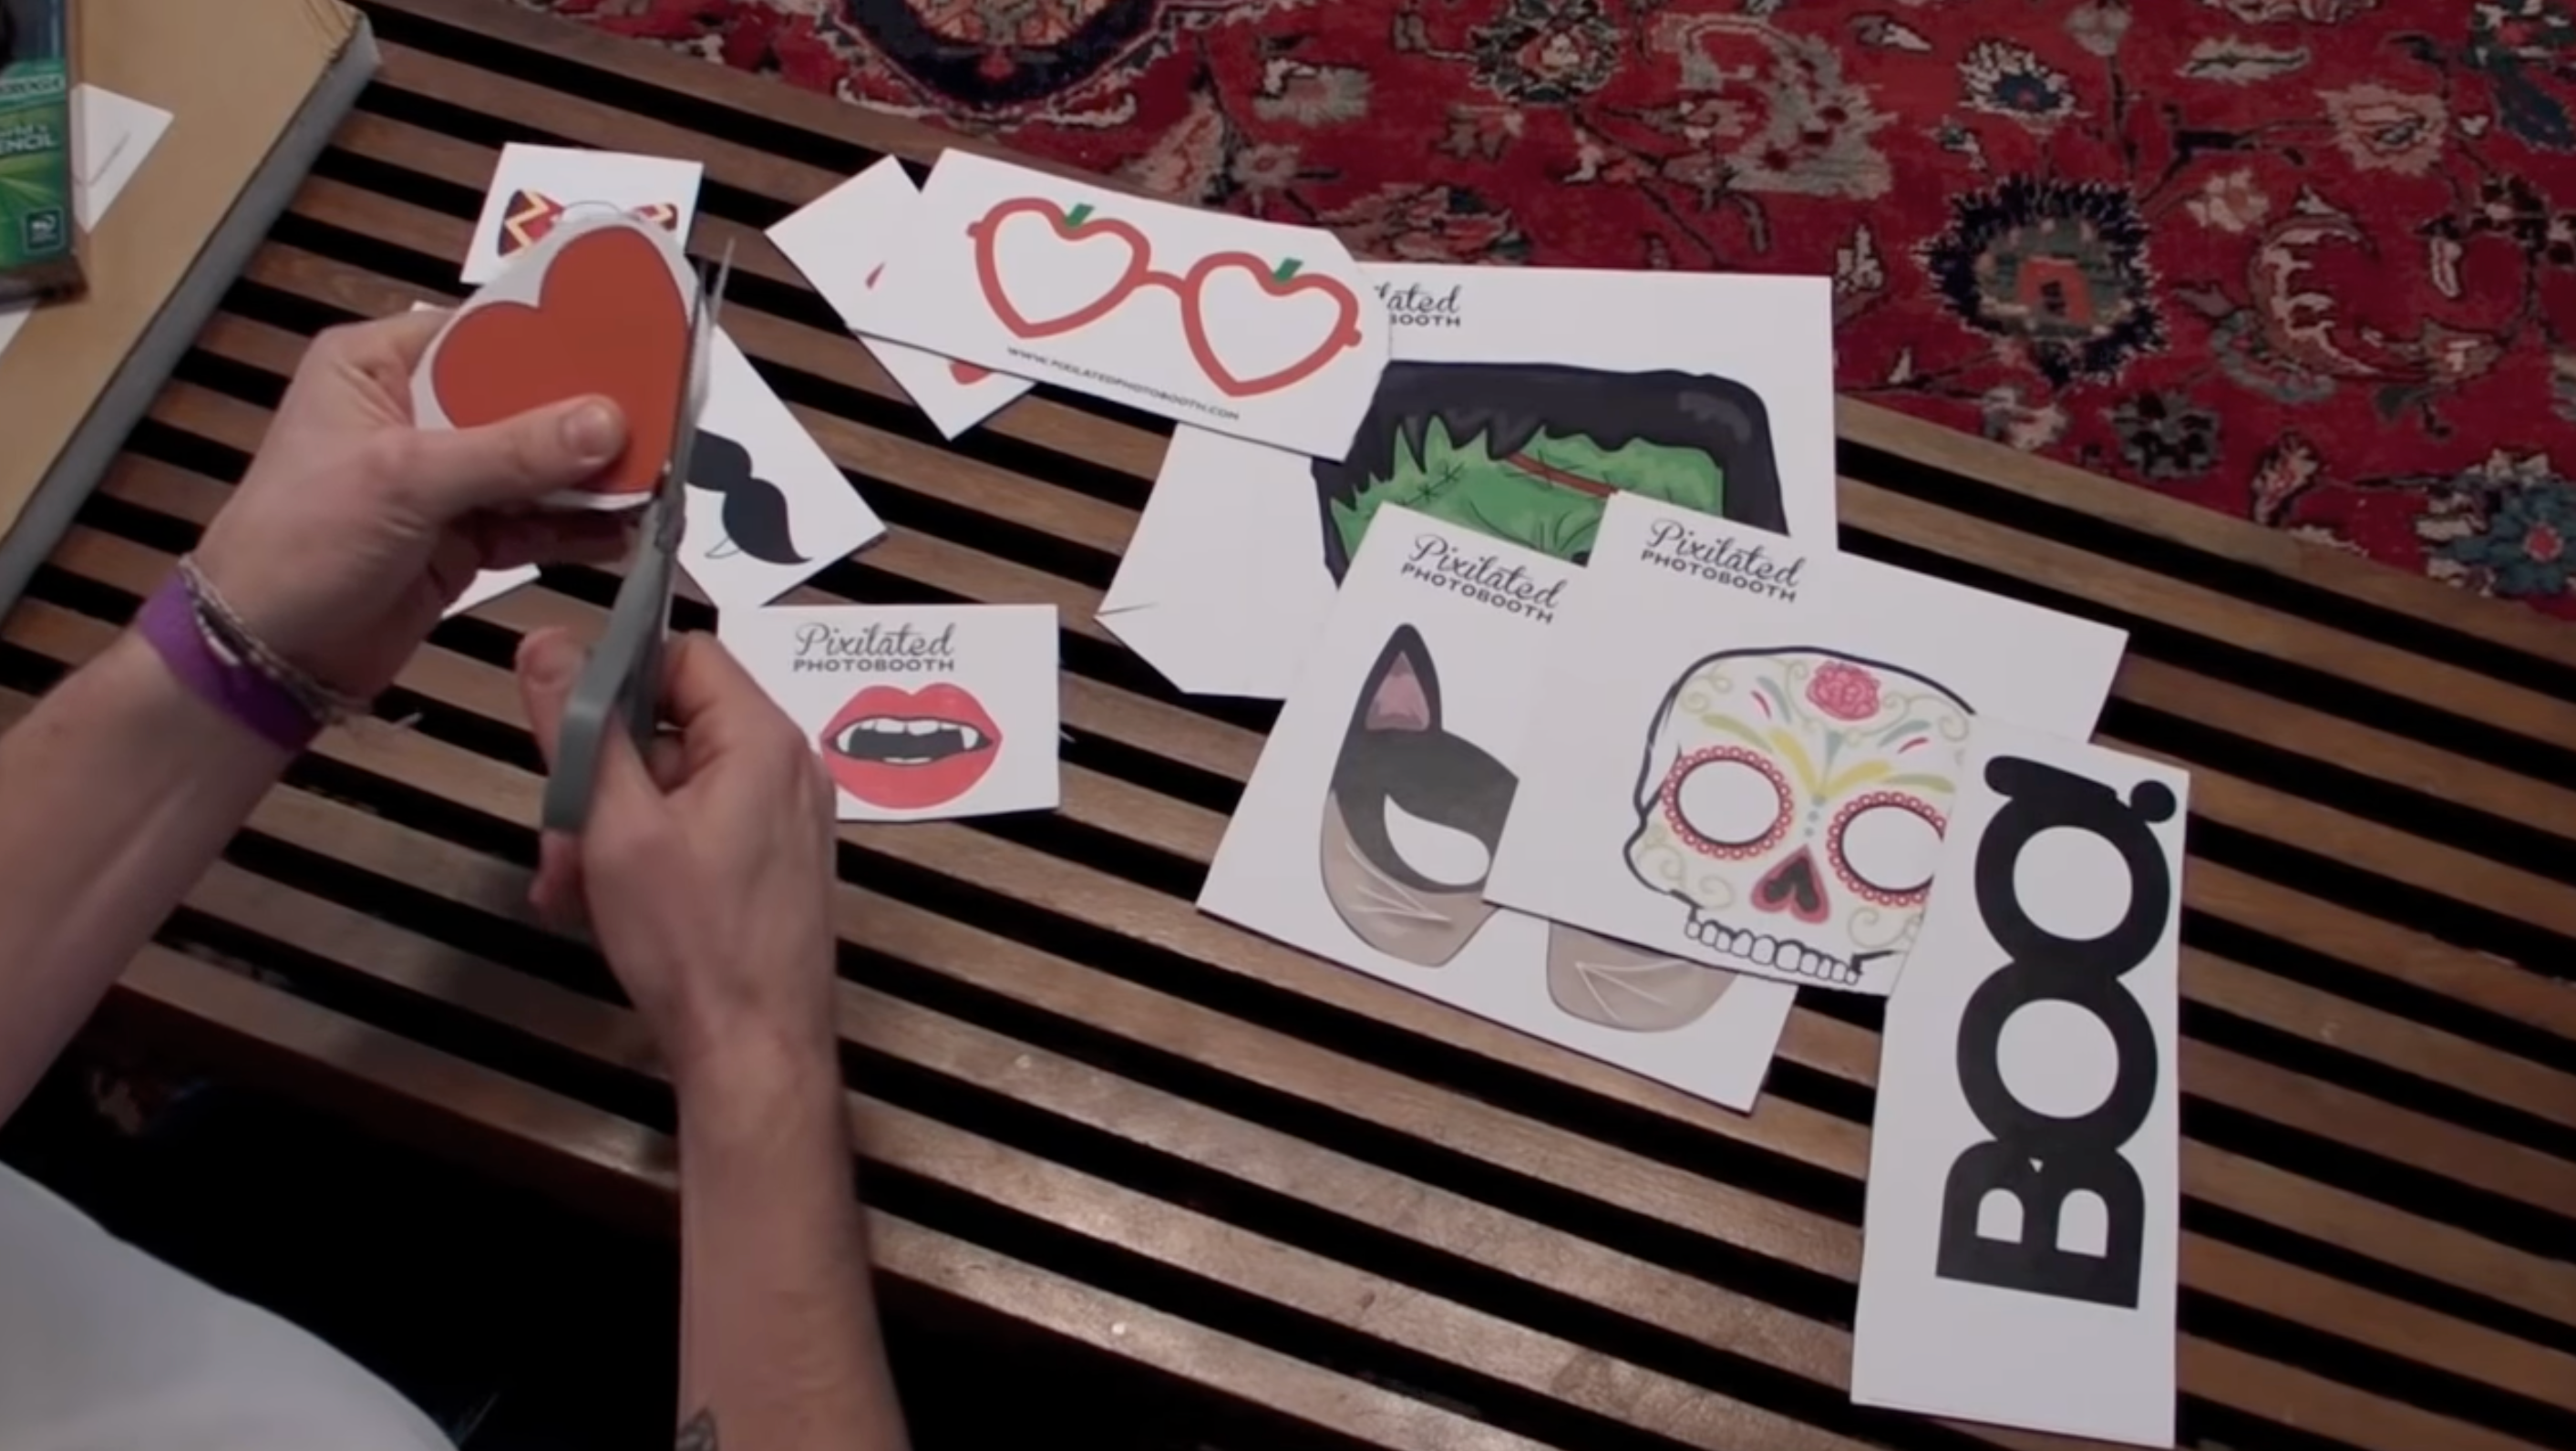 Load video: Video tutorial for how to print, cut and assemble DIY photo booth props